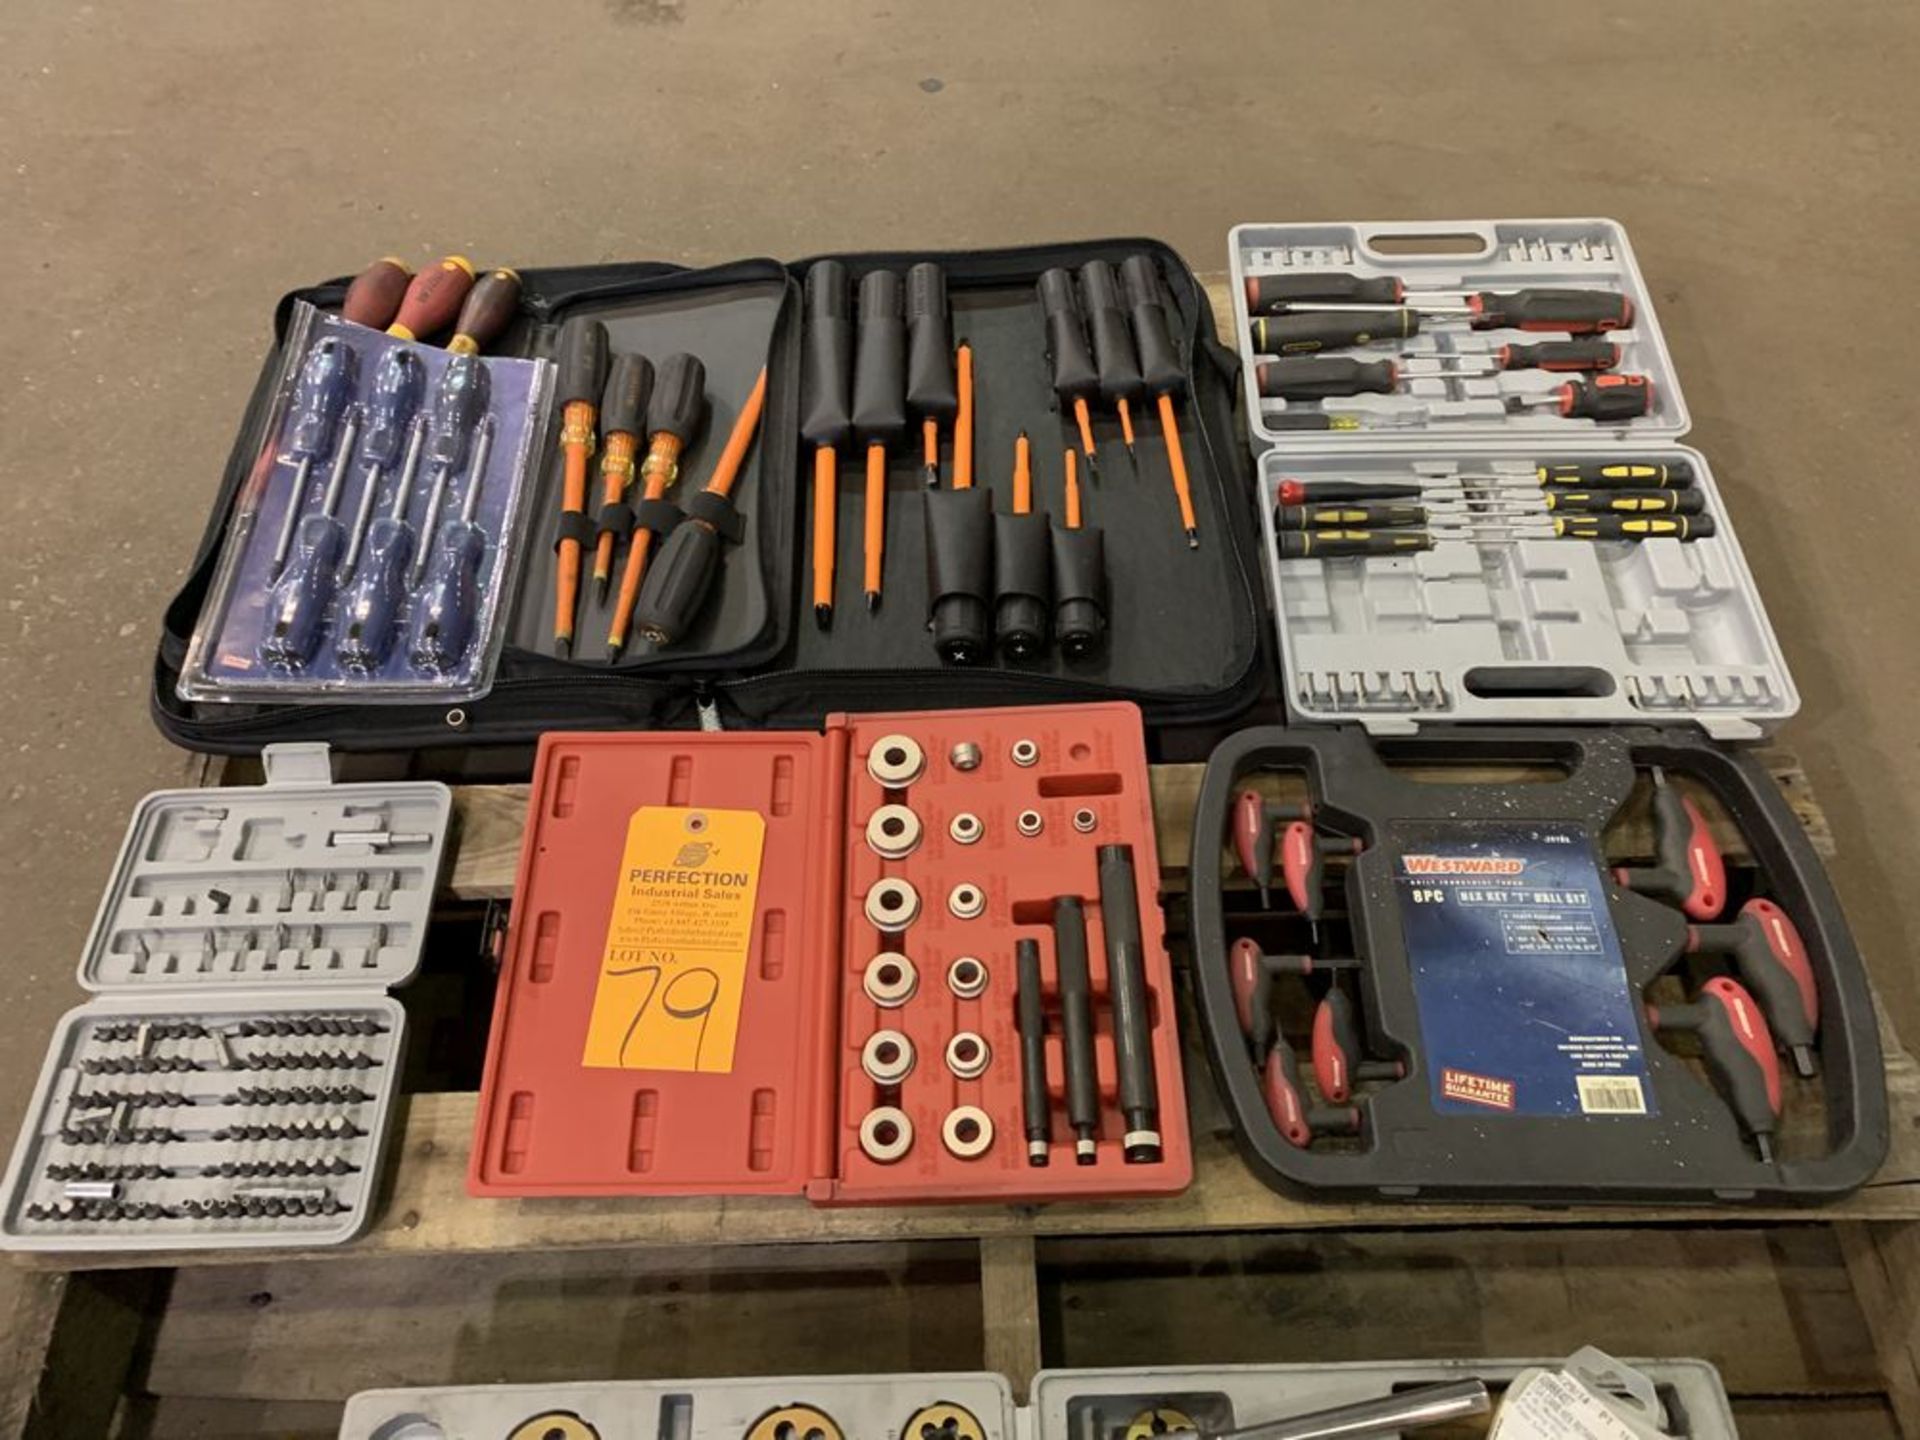 Lot Comprising Bushing Driver Set, T-Handle Set, and Electricians Screw Drivers